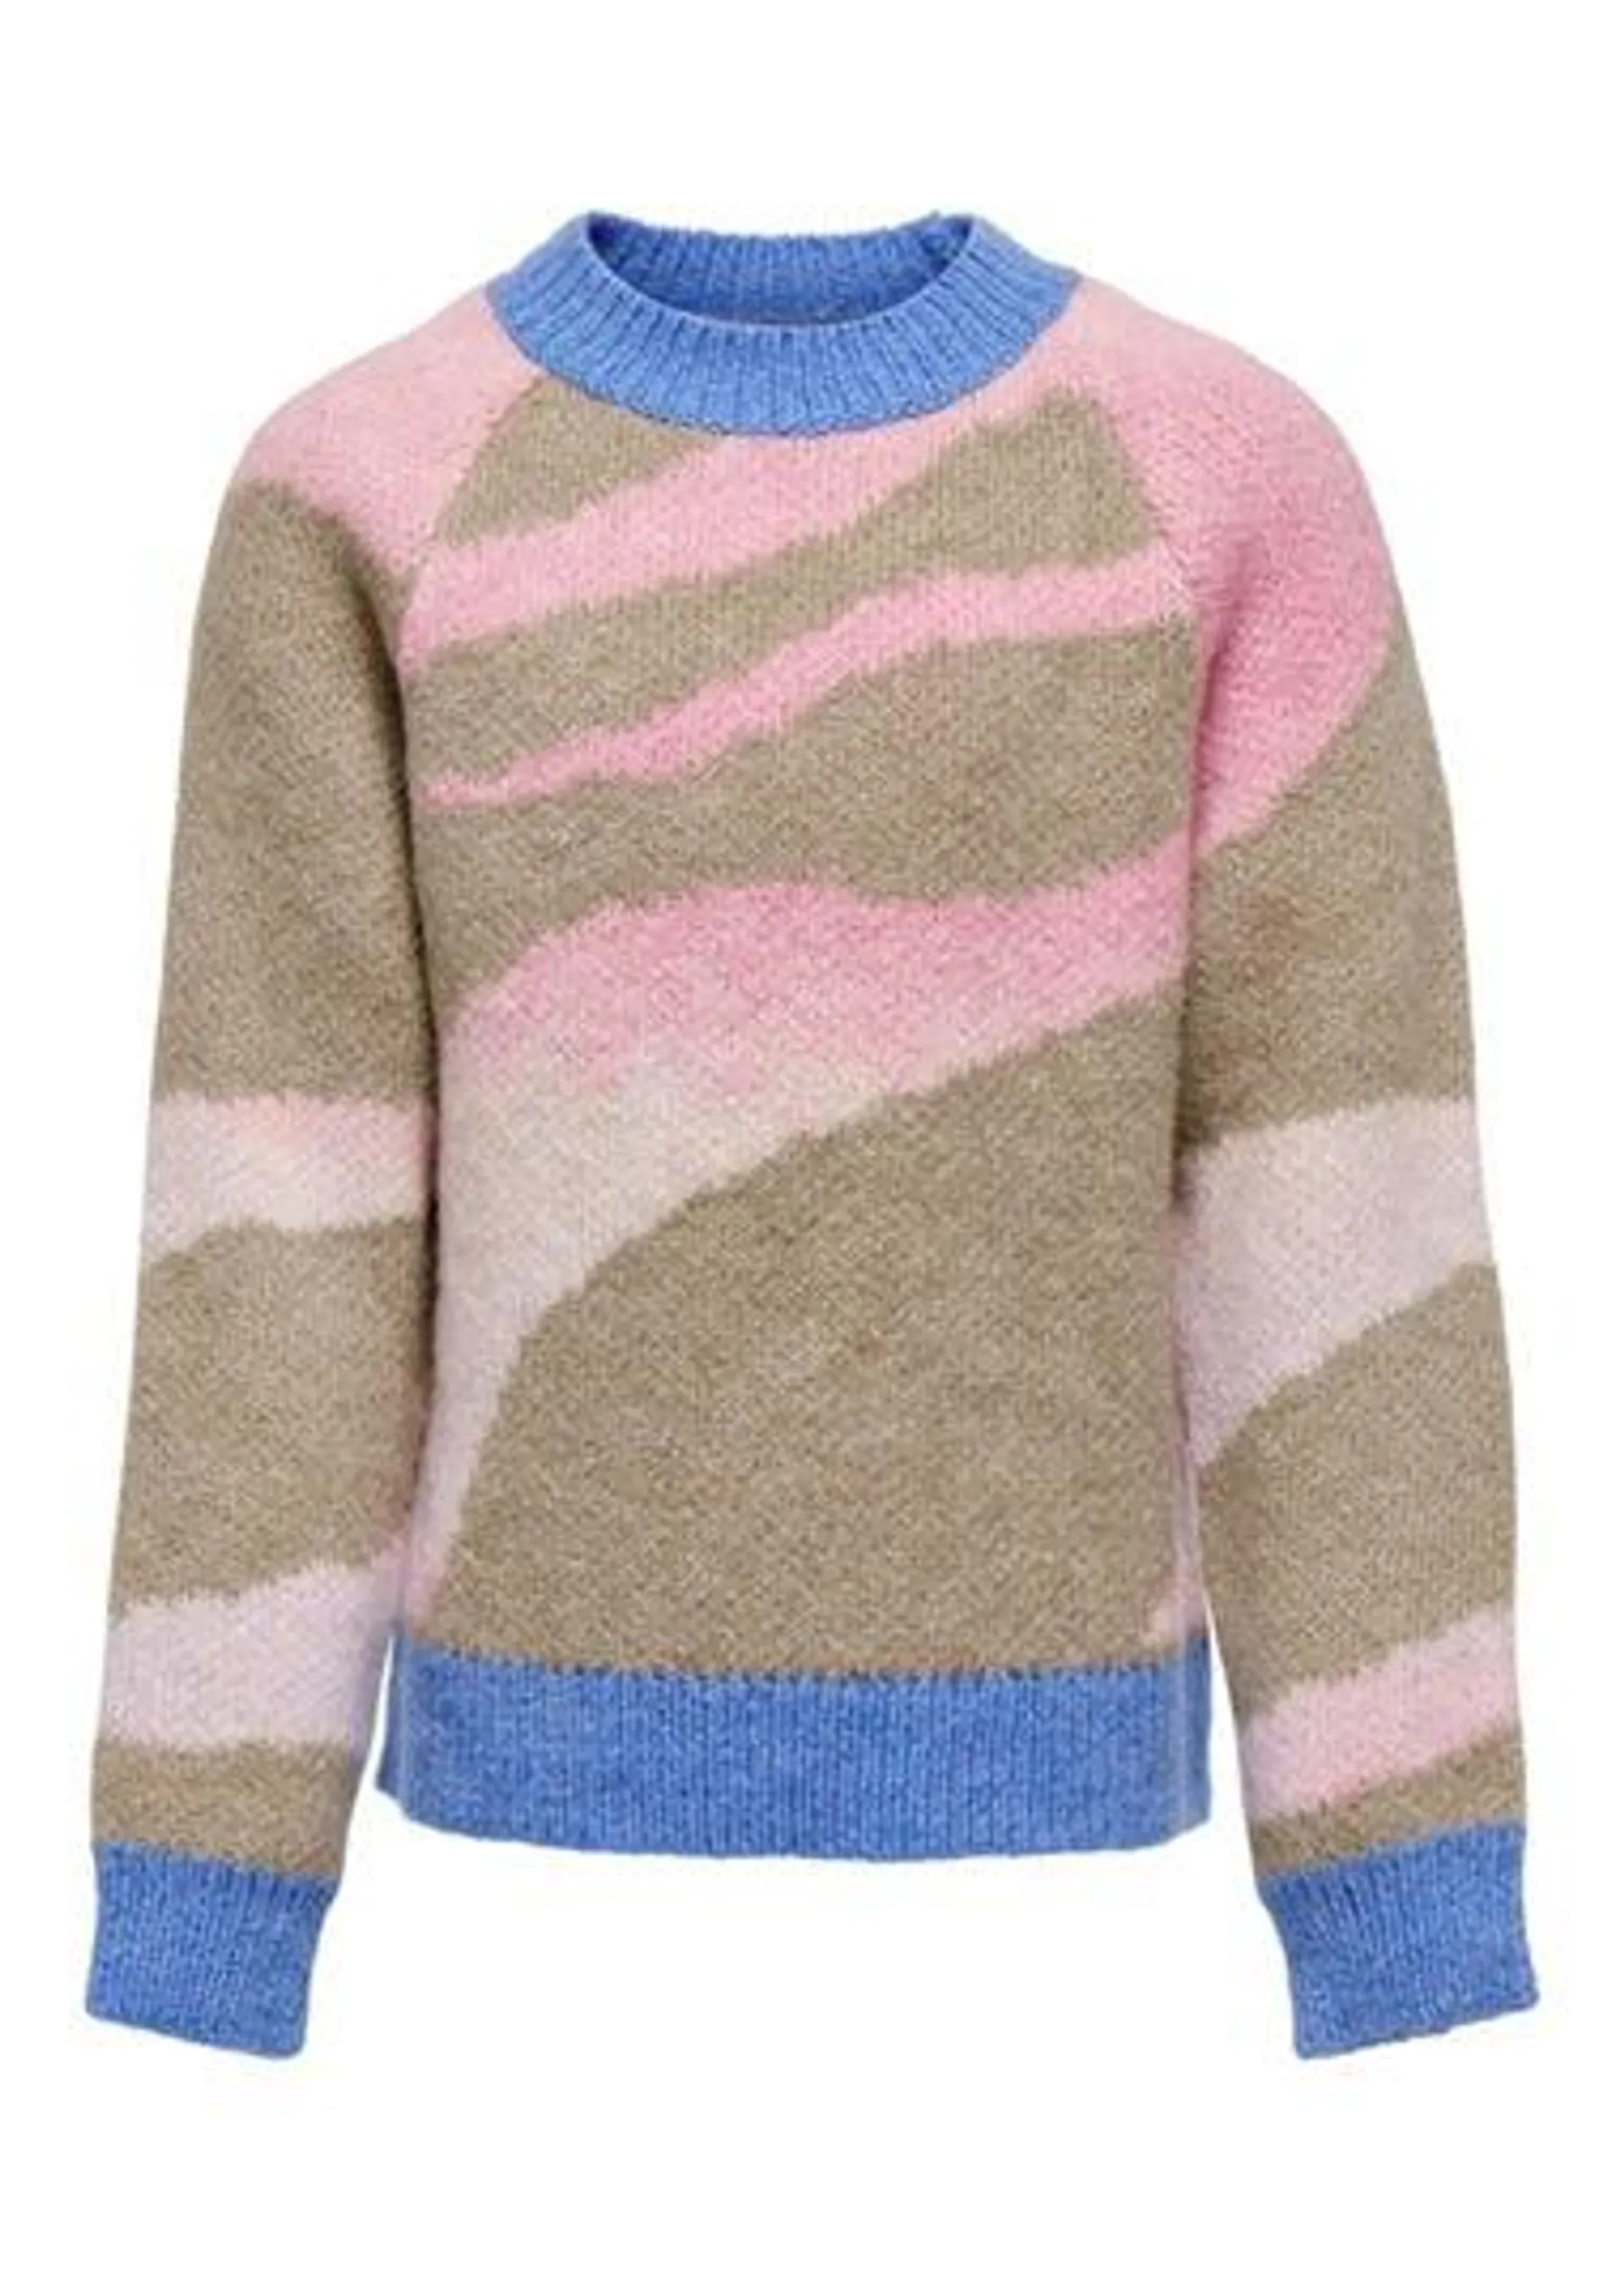 ONLY Kids Multicoloured Jumper (5-14yrs)